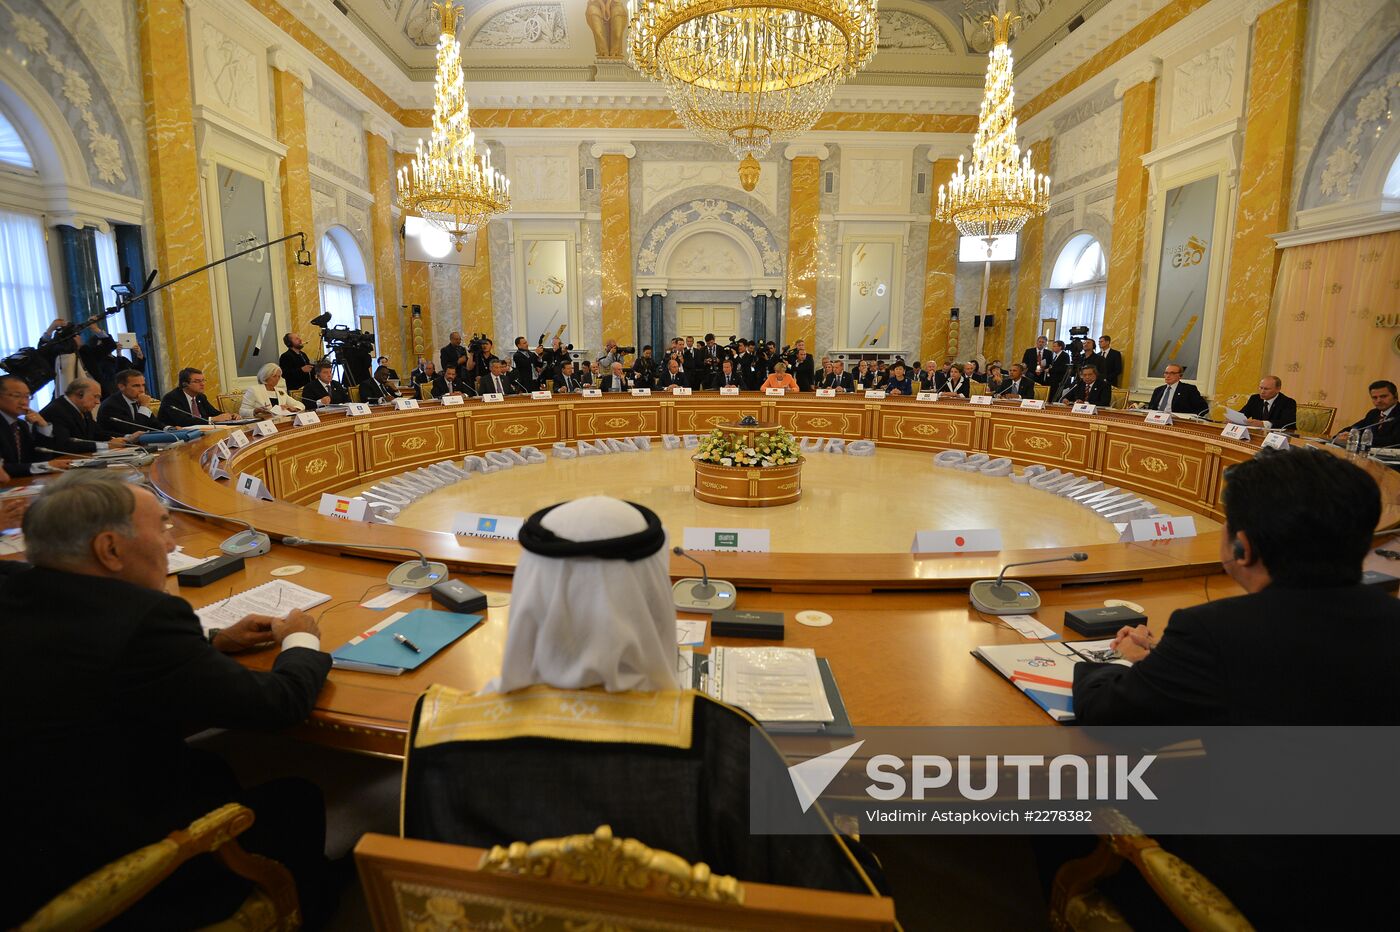 First working session of G20 Summit participants